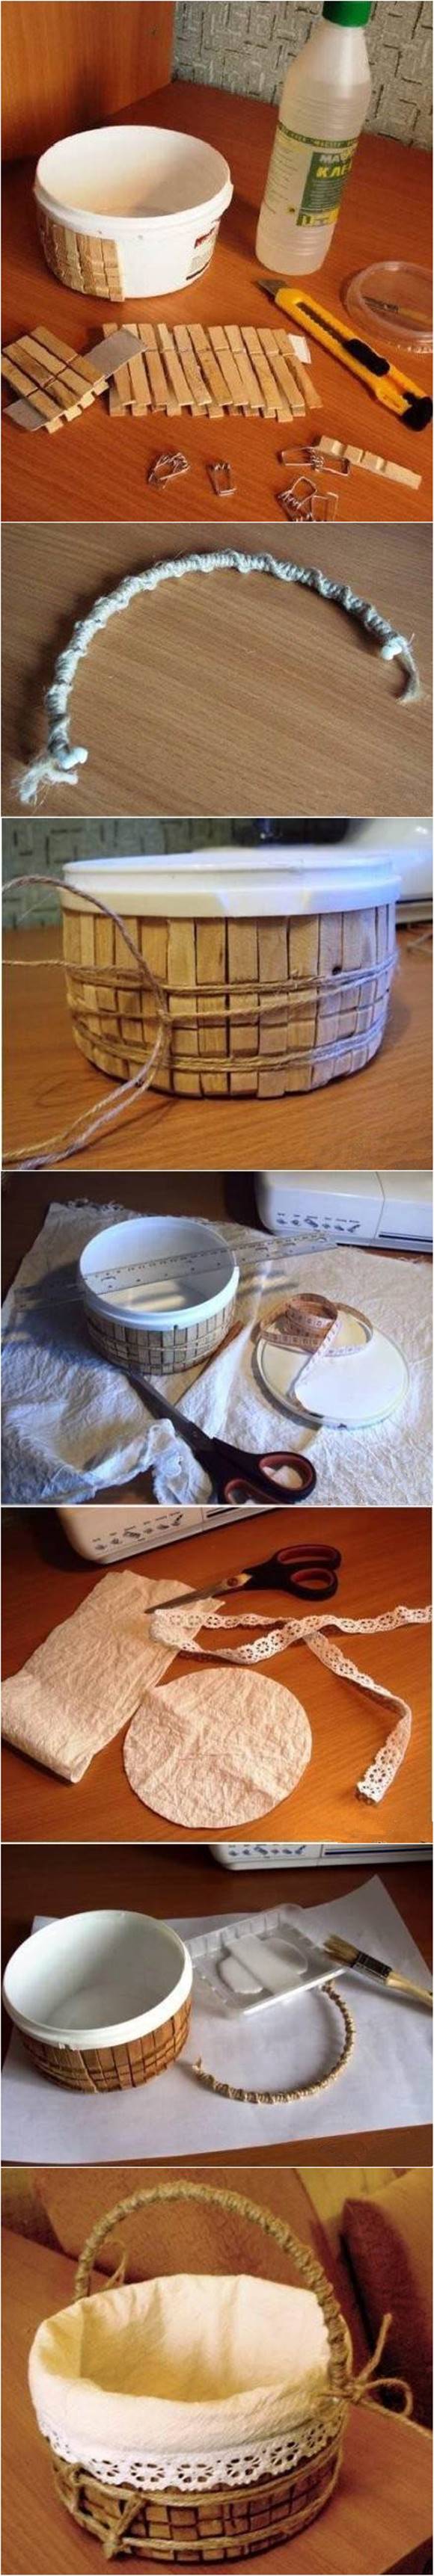 How to DIY Storage Basket from Plastic Container and Clothespins